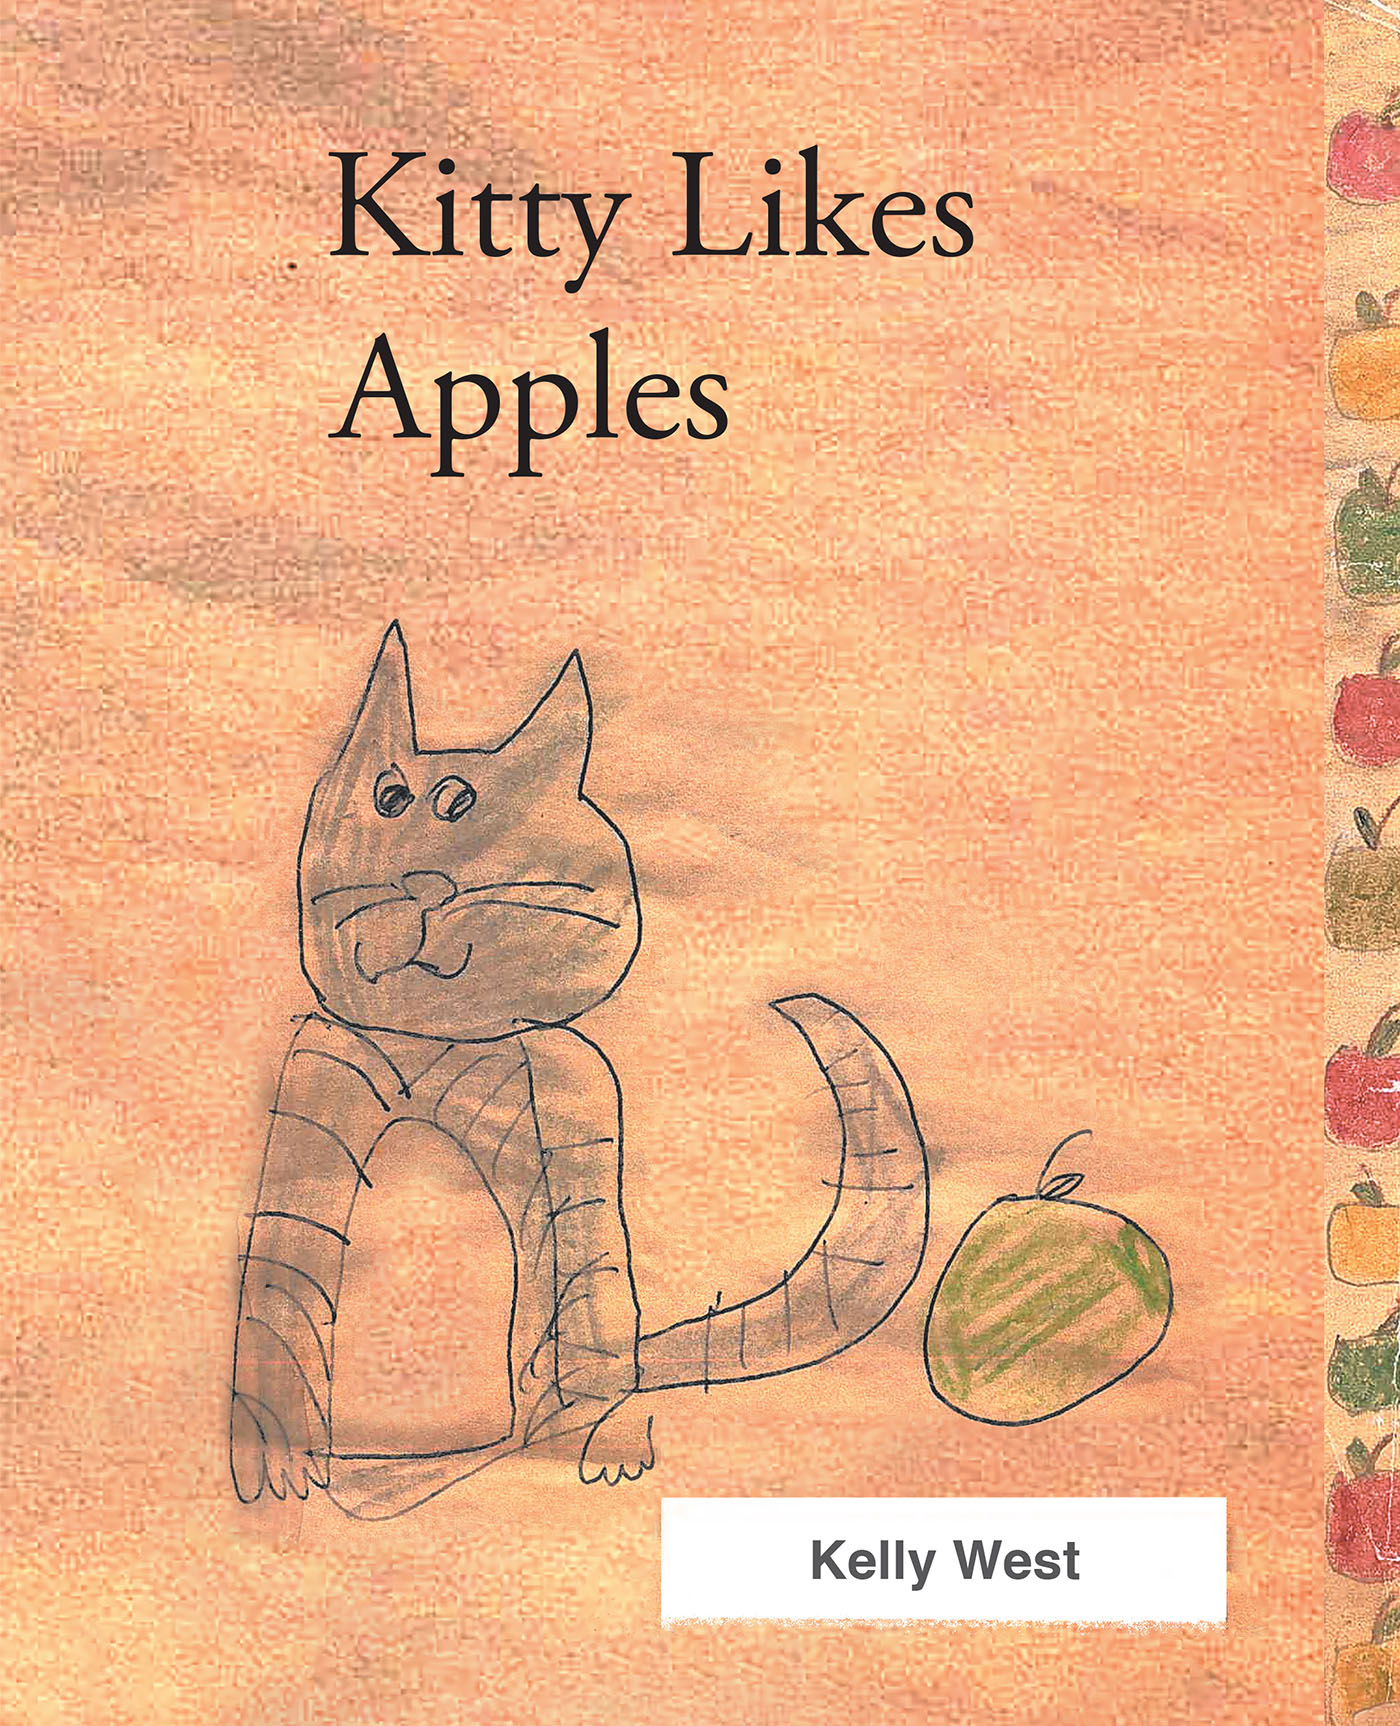 Kelly West’s Newly Released "Kitty Likes Apples" is a Delightful and Lighthearted Story of a Special Cat with a Taste for Apples